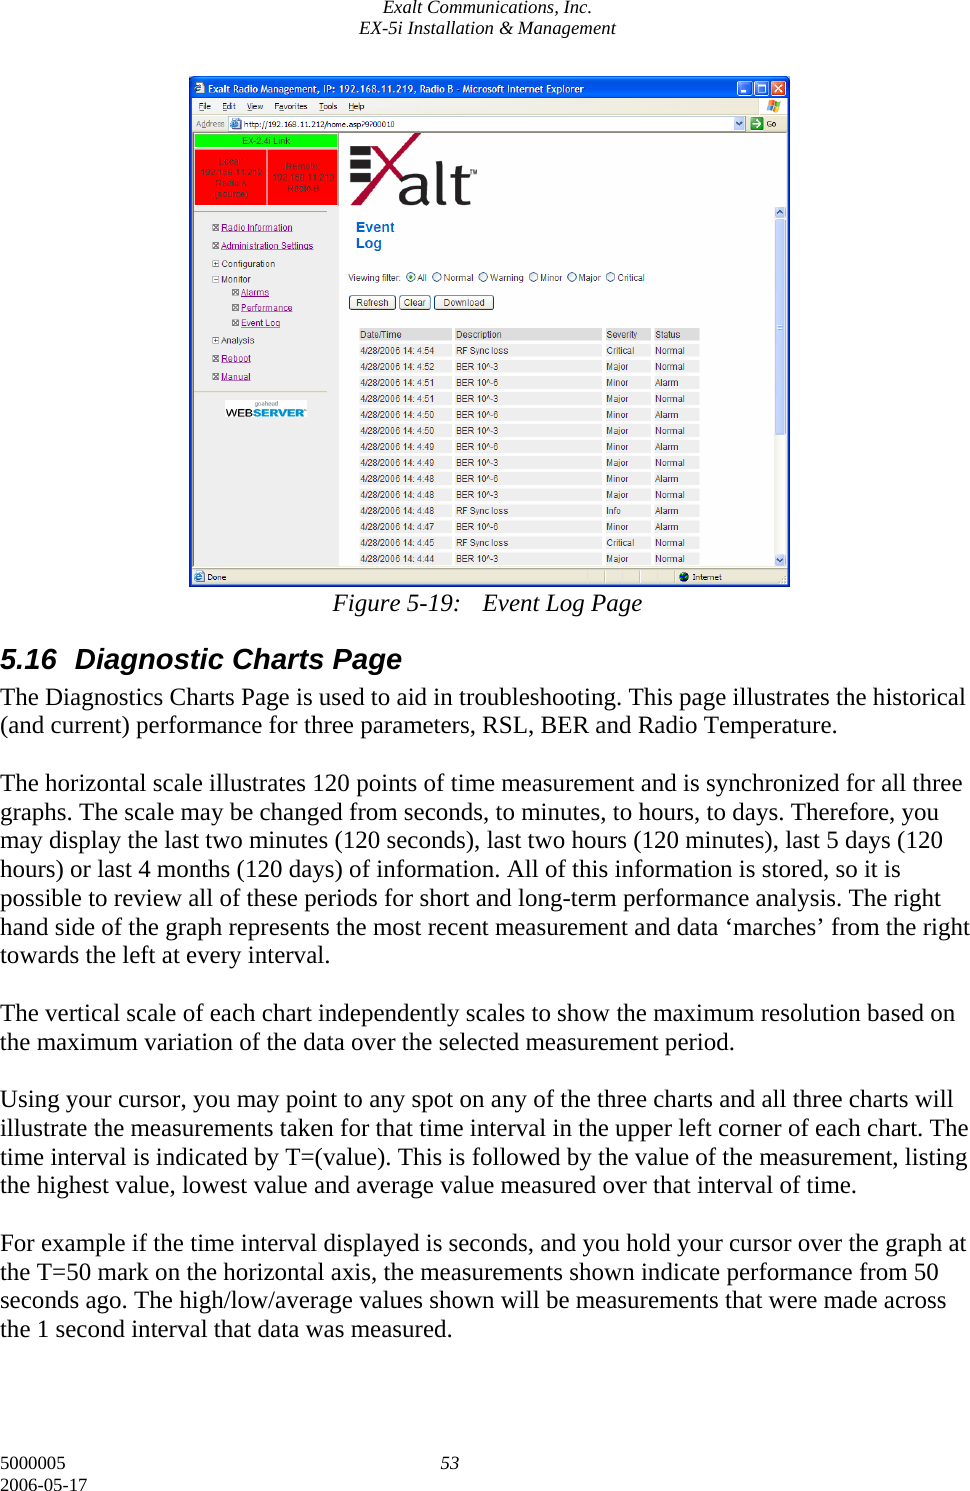 Exalt Communications, Inc. EX-5i Installation &amp; Management 5000005  53 2006-05-17                   Figure 5-19:  Event Log Page 5.16  Diagnostic Charts Page The Diagnostics Charts Page is used to aid in troubleshooting. This page illustrates the historical (and current) performance for three parameters, RSL, BER and Radio Temperature.  The horizontal scale illustrates 120 points of time measurement and is synchronized for all three graphs. The scale may be changed from seconds, to minutes, to hours, to days. Therefore, you may display the last two minutes (120 seconds), last two hours (120 minutes), last 5 days (120 hours) or last 4 months (120 days) of information. All of this information is stored, so it is possible to review all of these periods for short and long-term performance analysis. The right hand side of the graph represents the most recent measurement and data ‘marches’ from the right towards the left at every interval.  The vertical scale of each chart independently scales to show the maximum resolution based on the maximum variation of the data over the selected measurement period.   Using your cursor, you may point to any spot on any of the three charts and all three charts will illustrate the measurements taken for that time interval in the upper left corner of each chart. The time interval is indicated by T=(value). This is followed by the value of the measurement, listing the highest value, lowest value and average value measured over that interval of time.  For example if the time interval displayed is seconds, and you hold your cursor over the graph at the T=50 mark on the horizontal axis, the measurements shown indicate performance from 50 seconds ago. The high/low/average values shown will be measurements that were made across the 1 second interval that data was measured.  